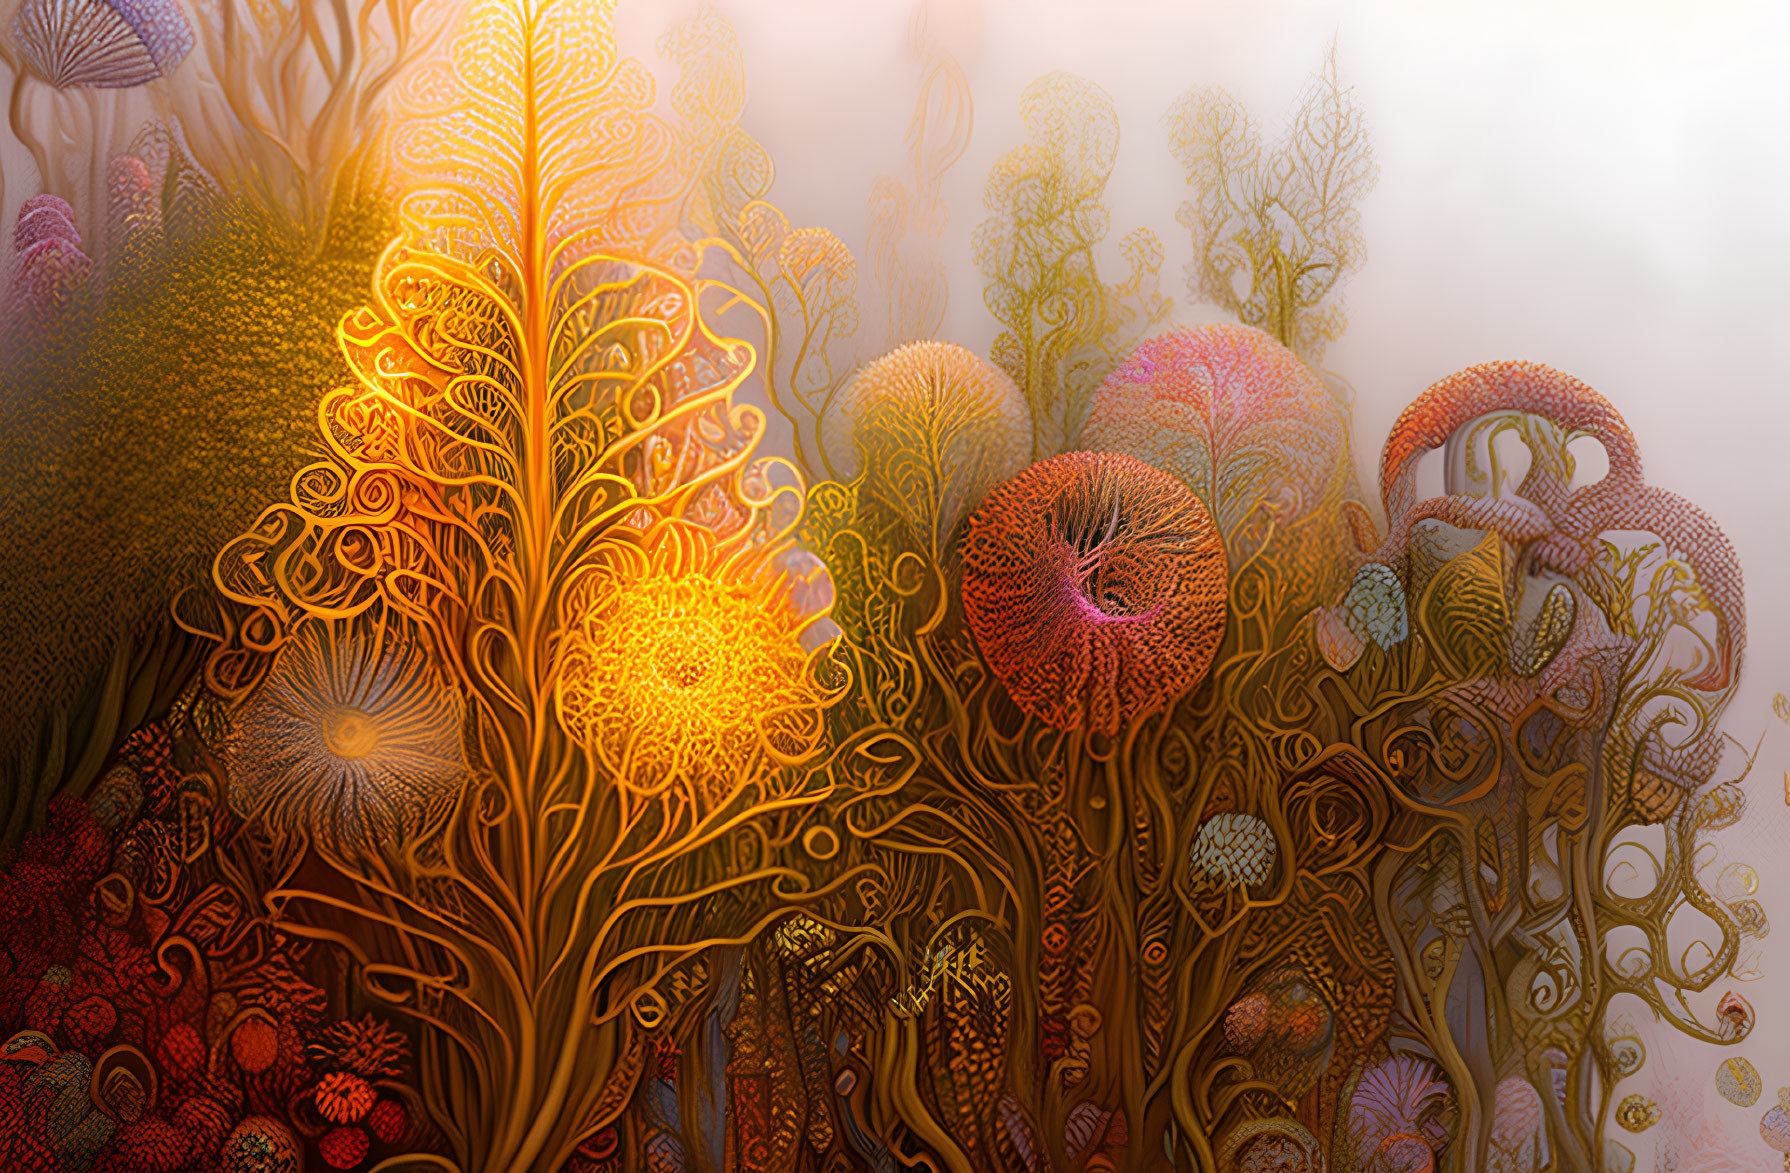 Fantastical forest digital artwork with glowing tree-like structures